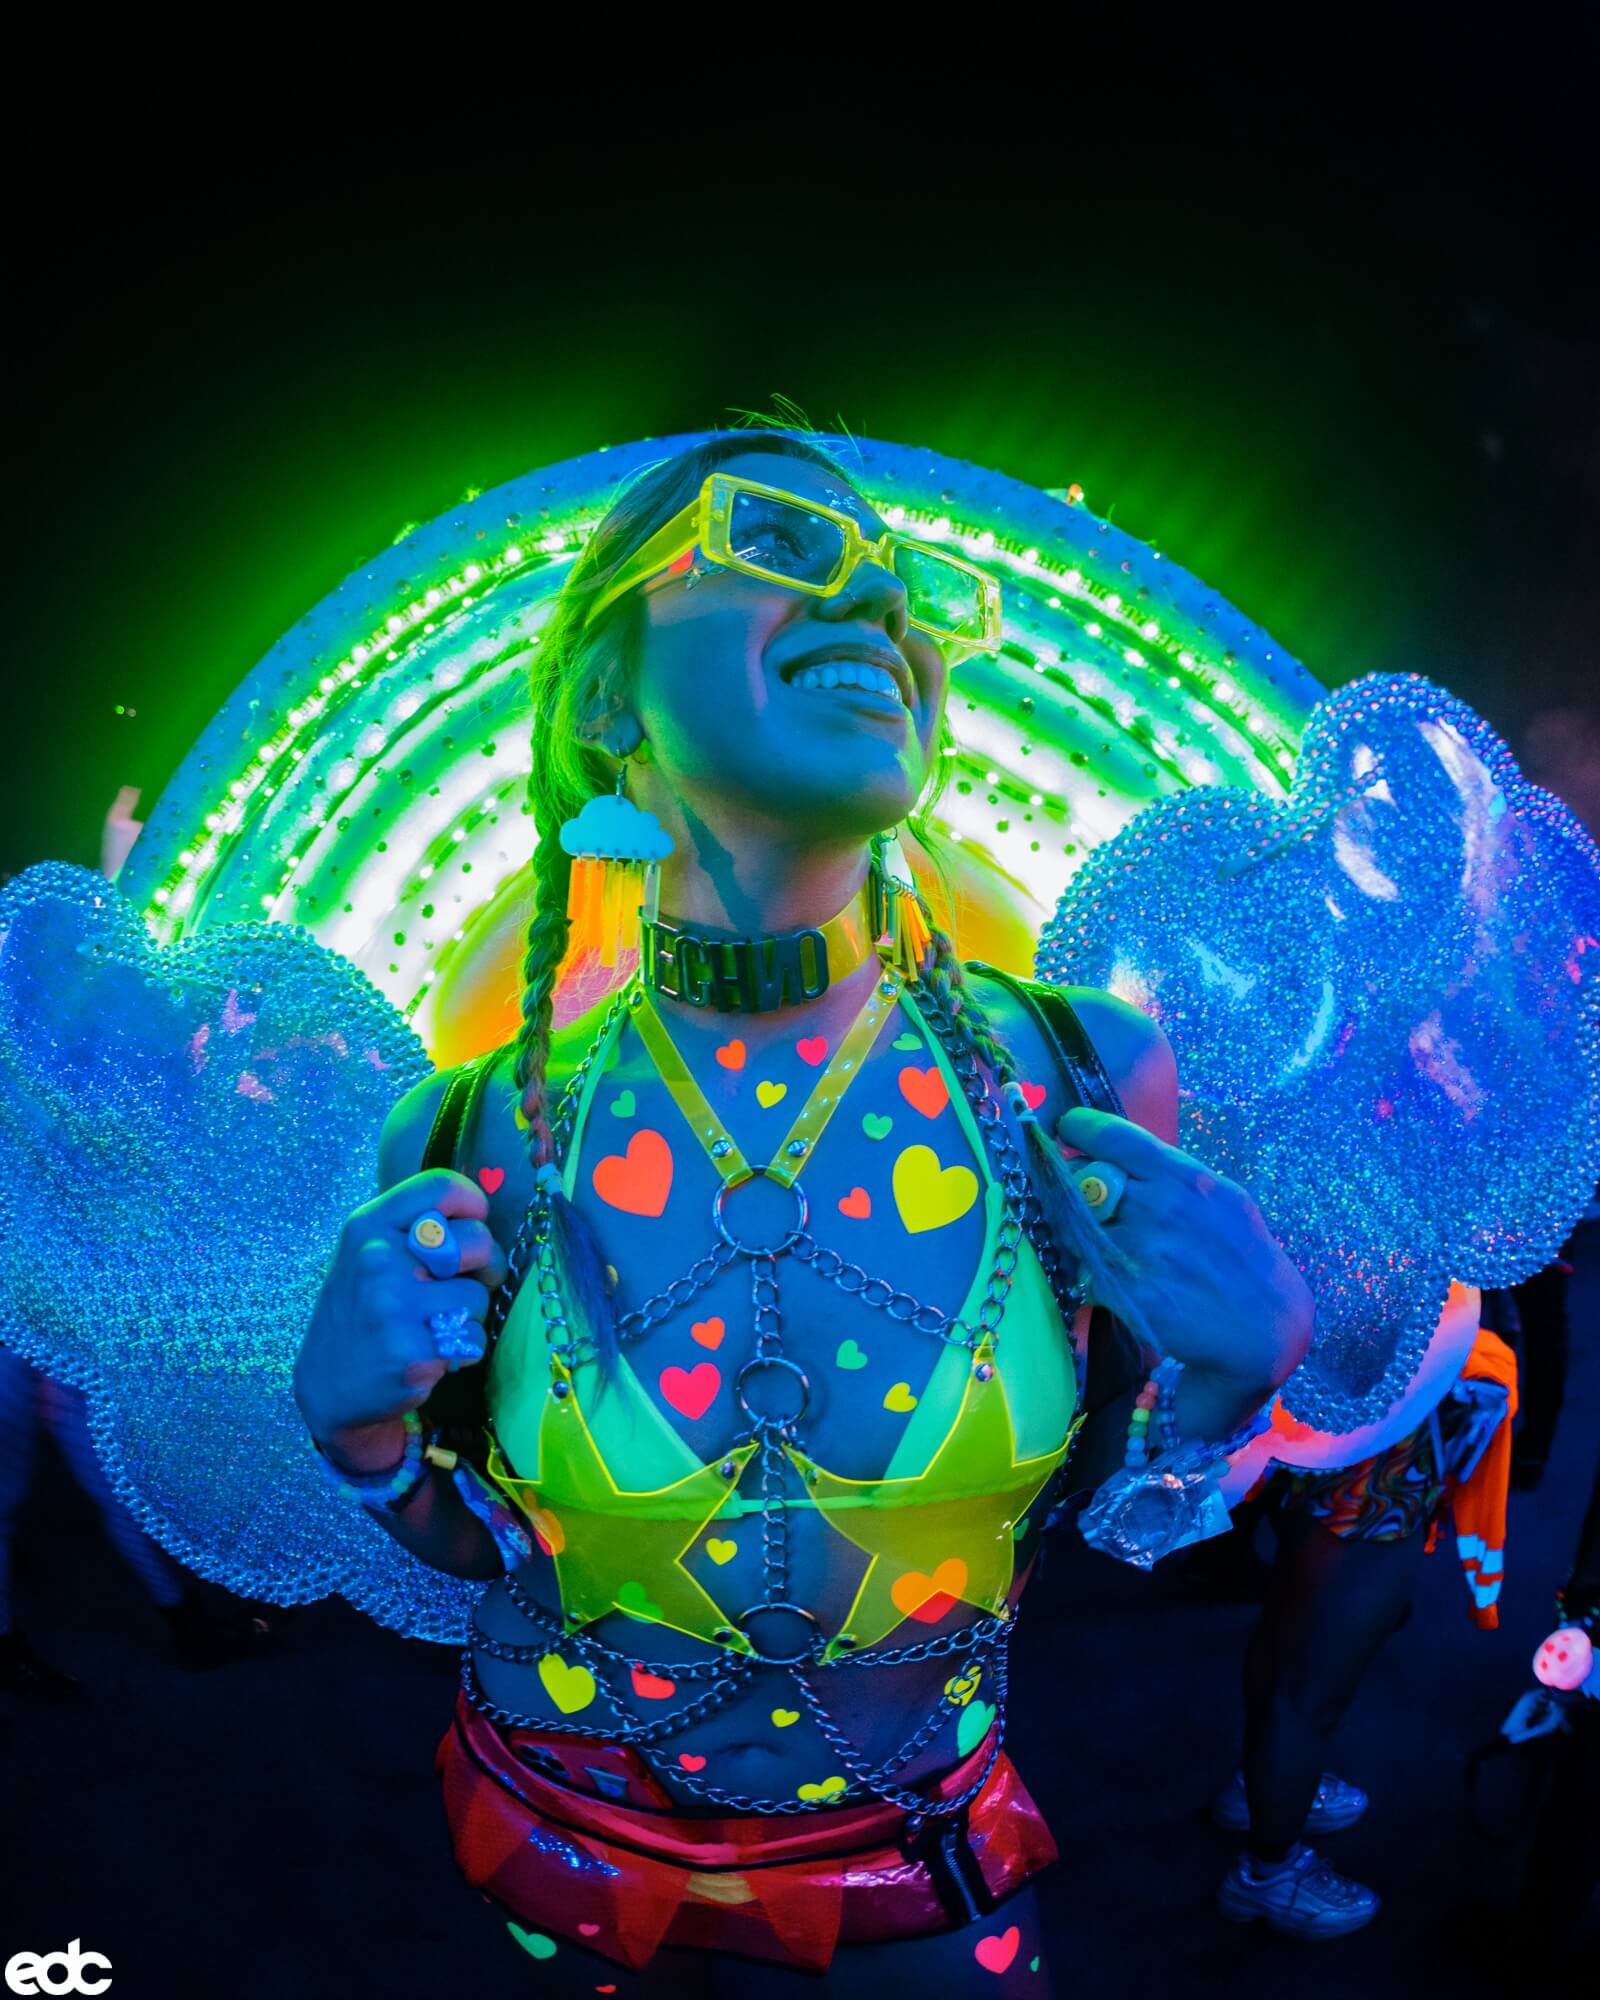 EDM fan dressed in electric neon outfit